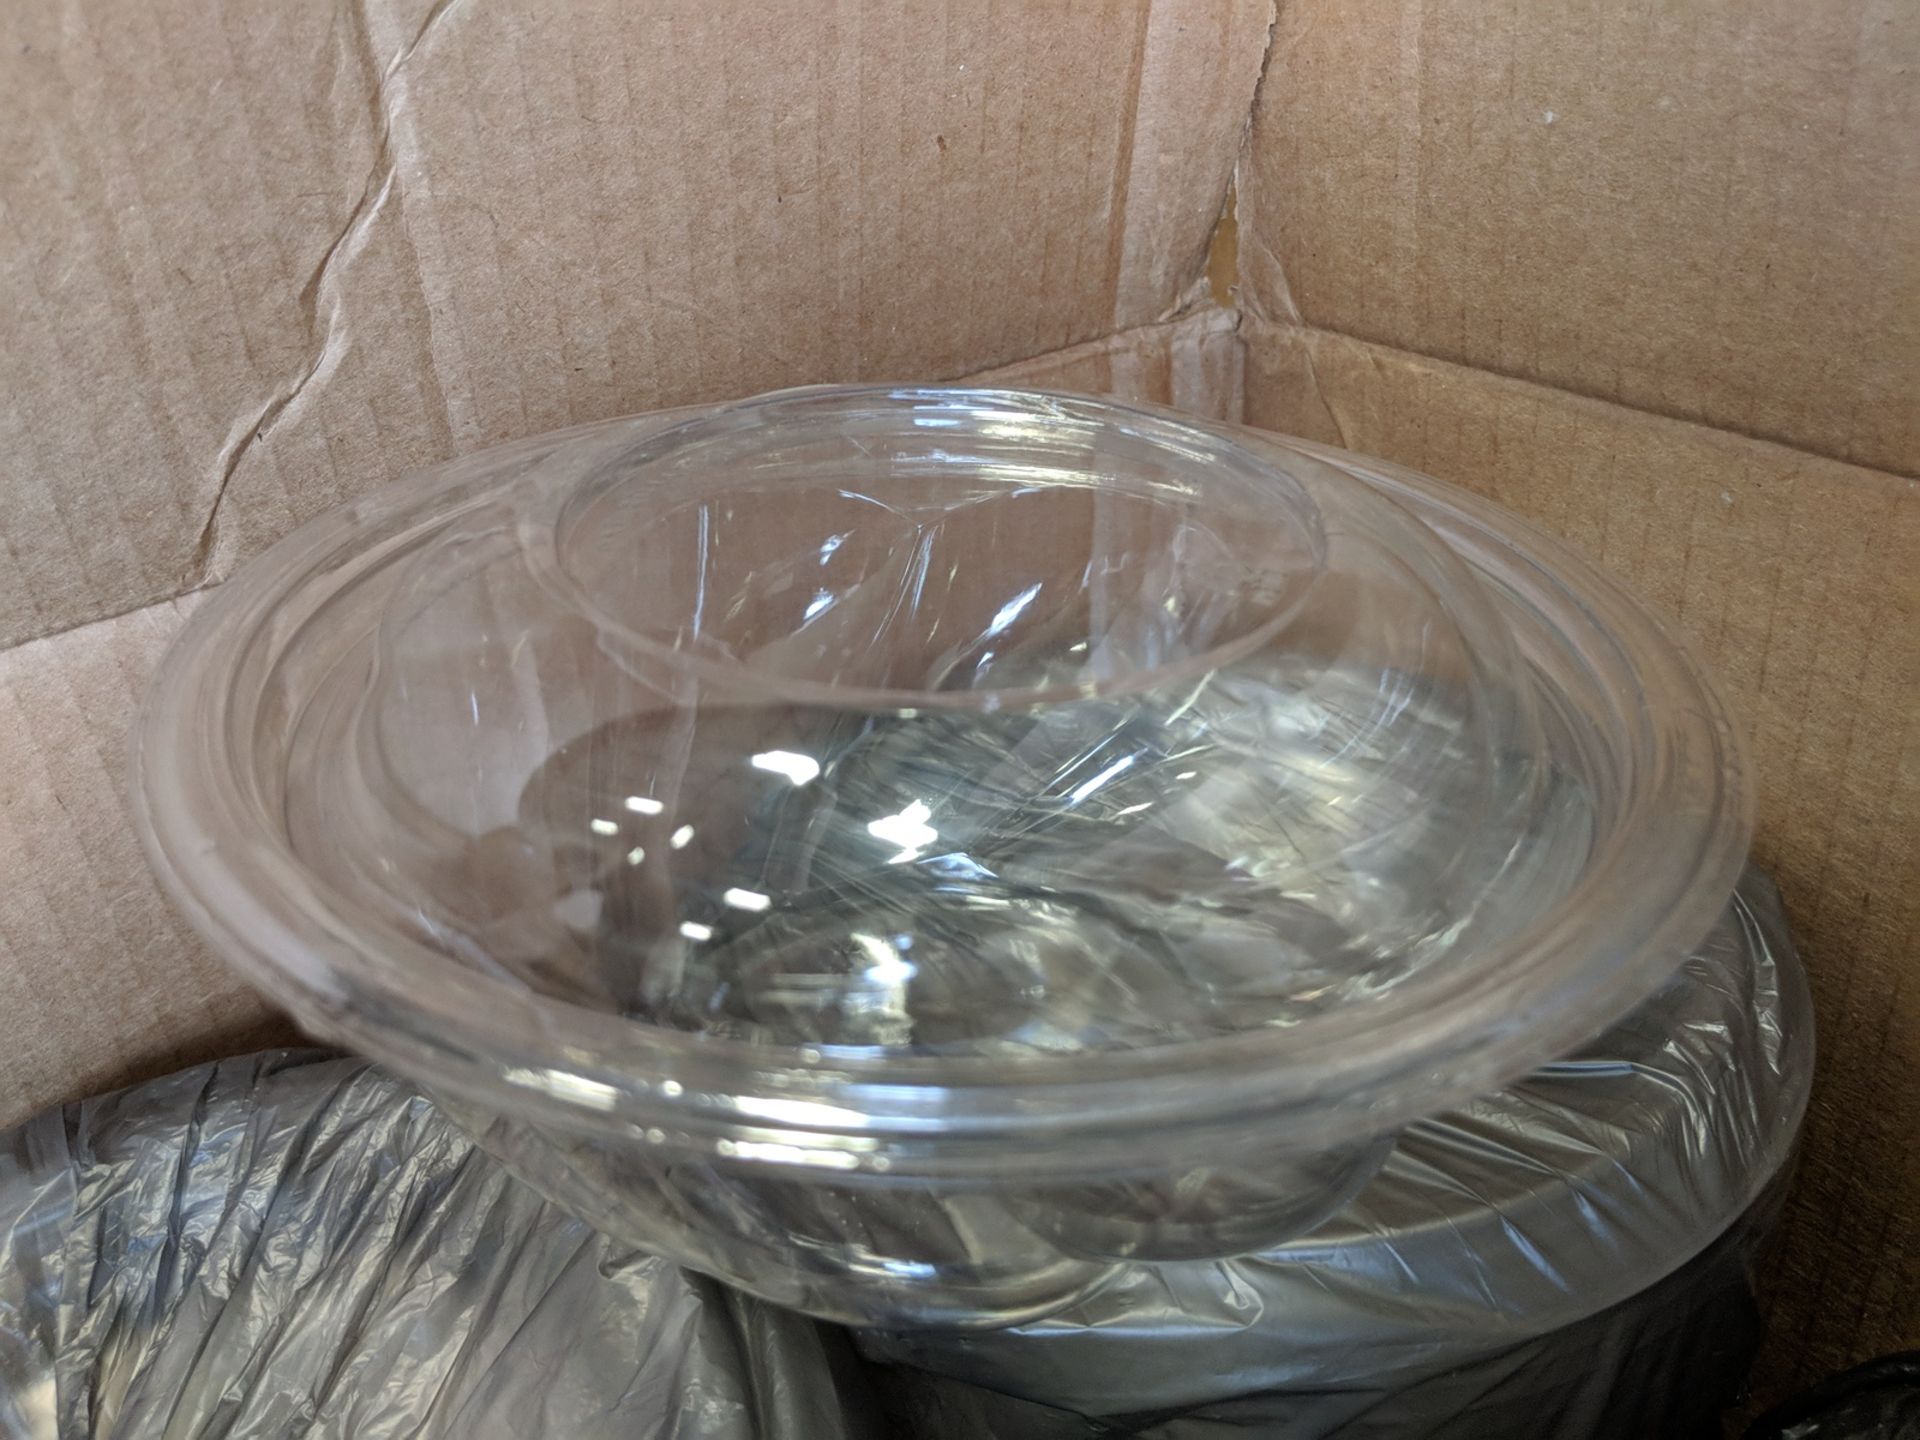 24oz/710ml, 7" Swirl Bowls with Lids, Pactic 724PSSL - Lot of 150 (300 Pieces) - Image 2 of 2